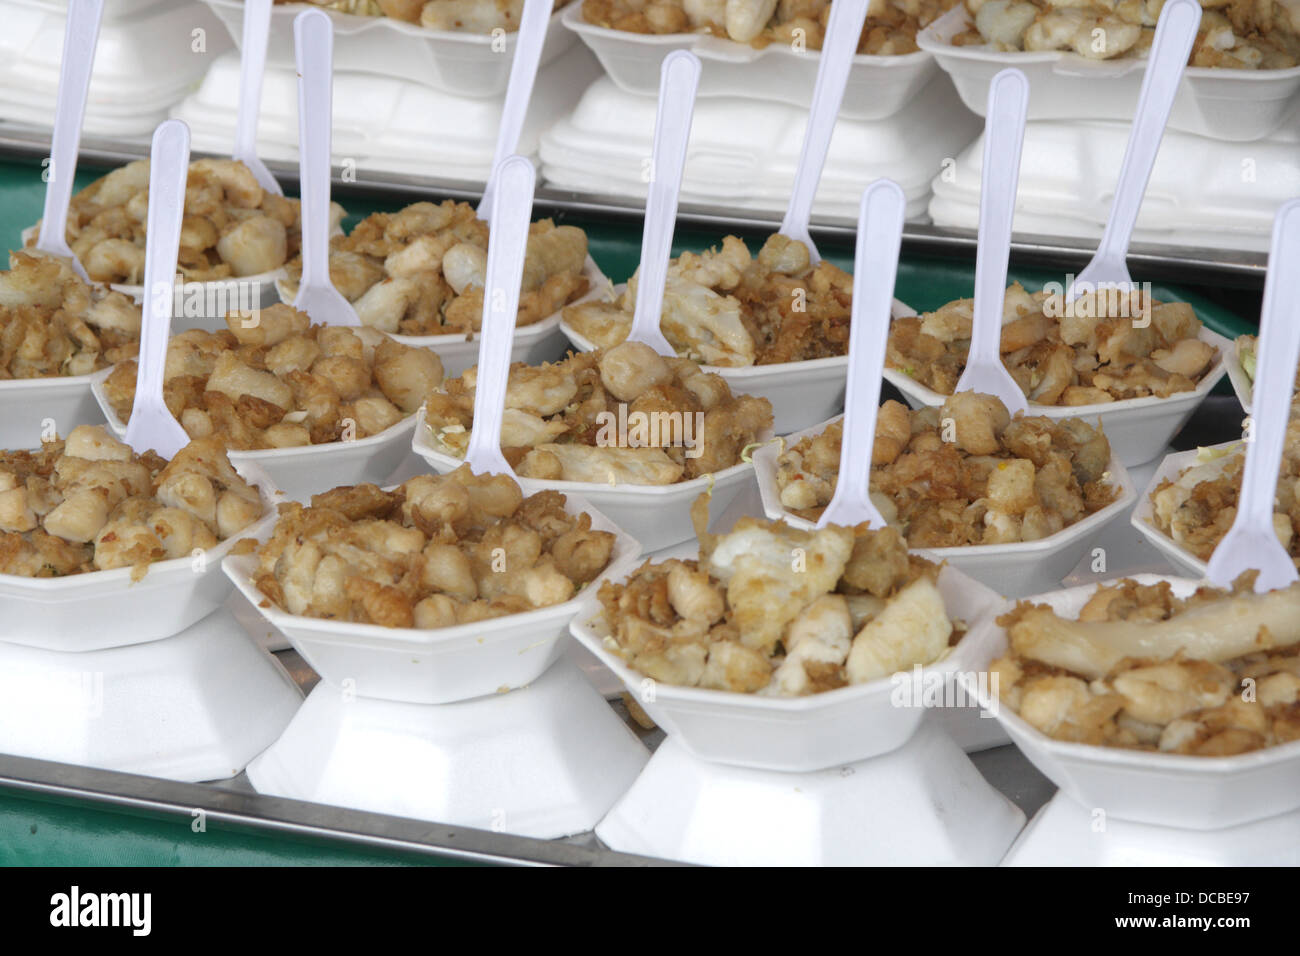 Fried squid eggs on sale Stock Photo